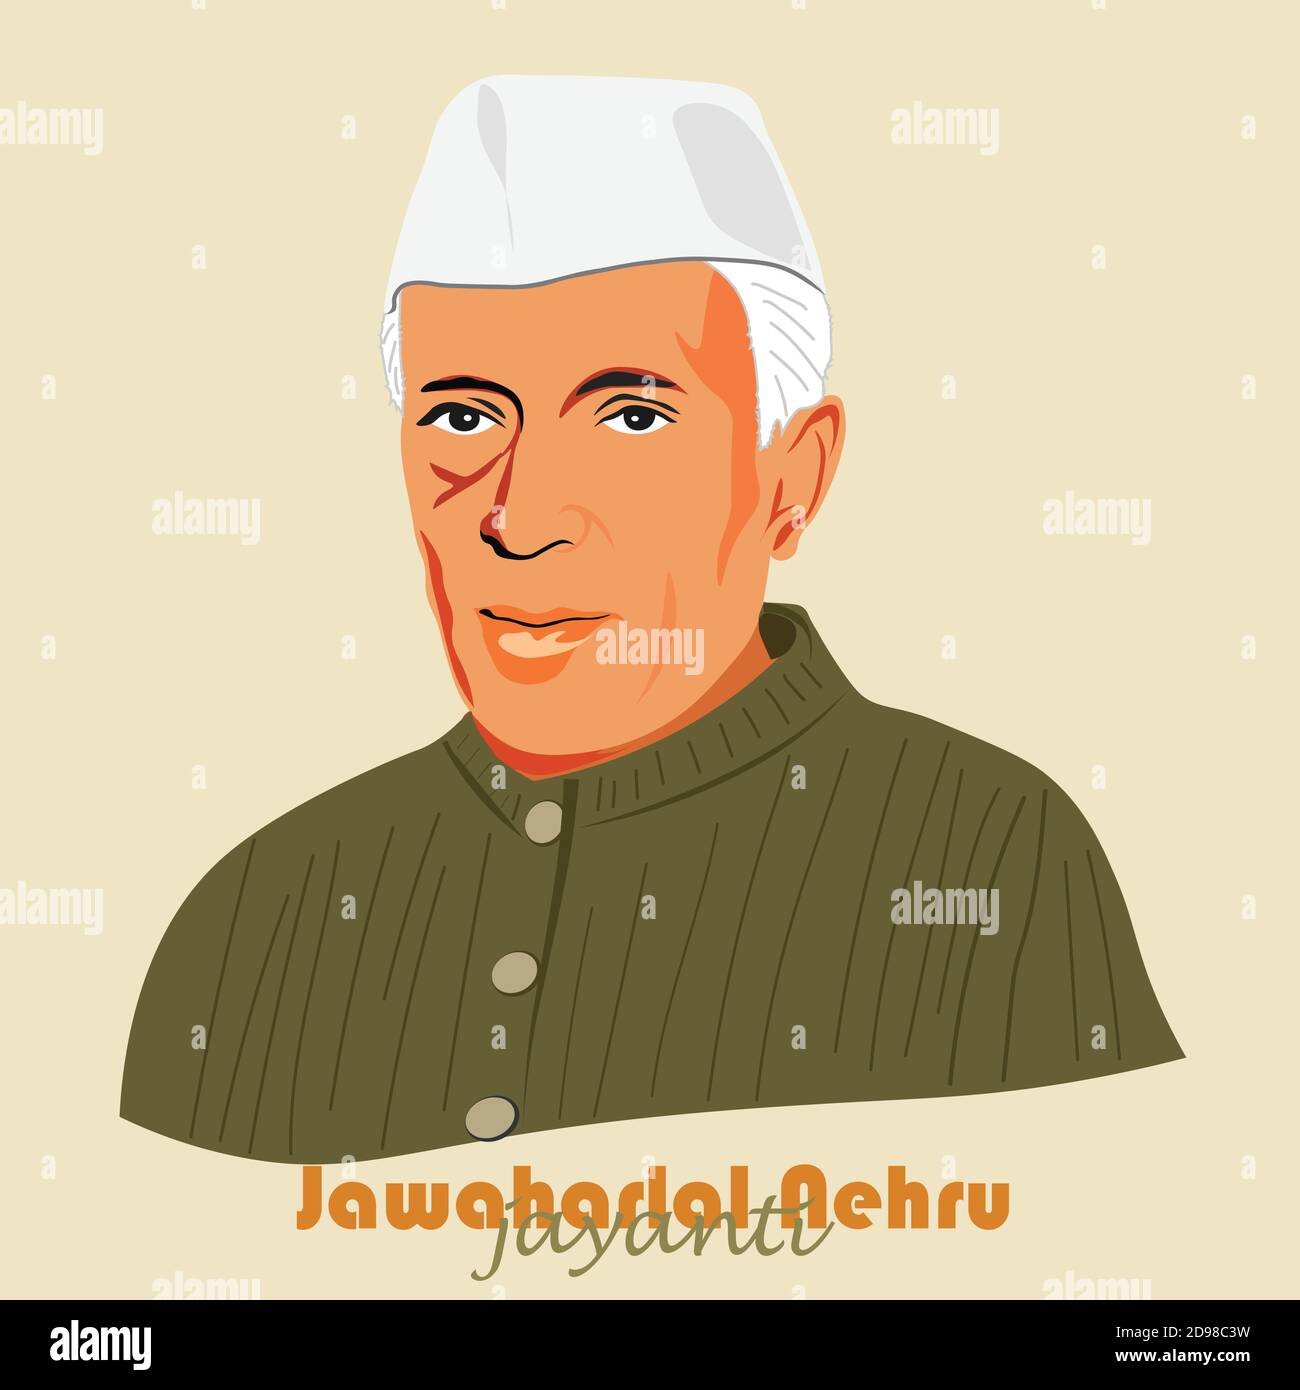 Jawaharlal nehru drawing step by step | how to draw pandit nehru | draw  jawaharlal nehru - YouTube